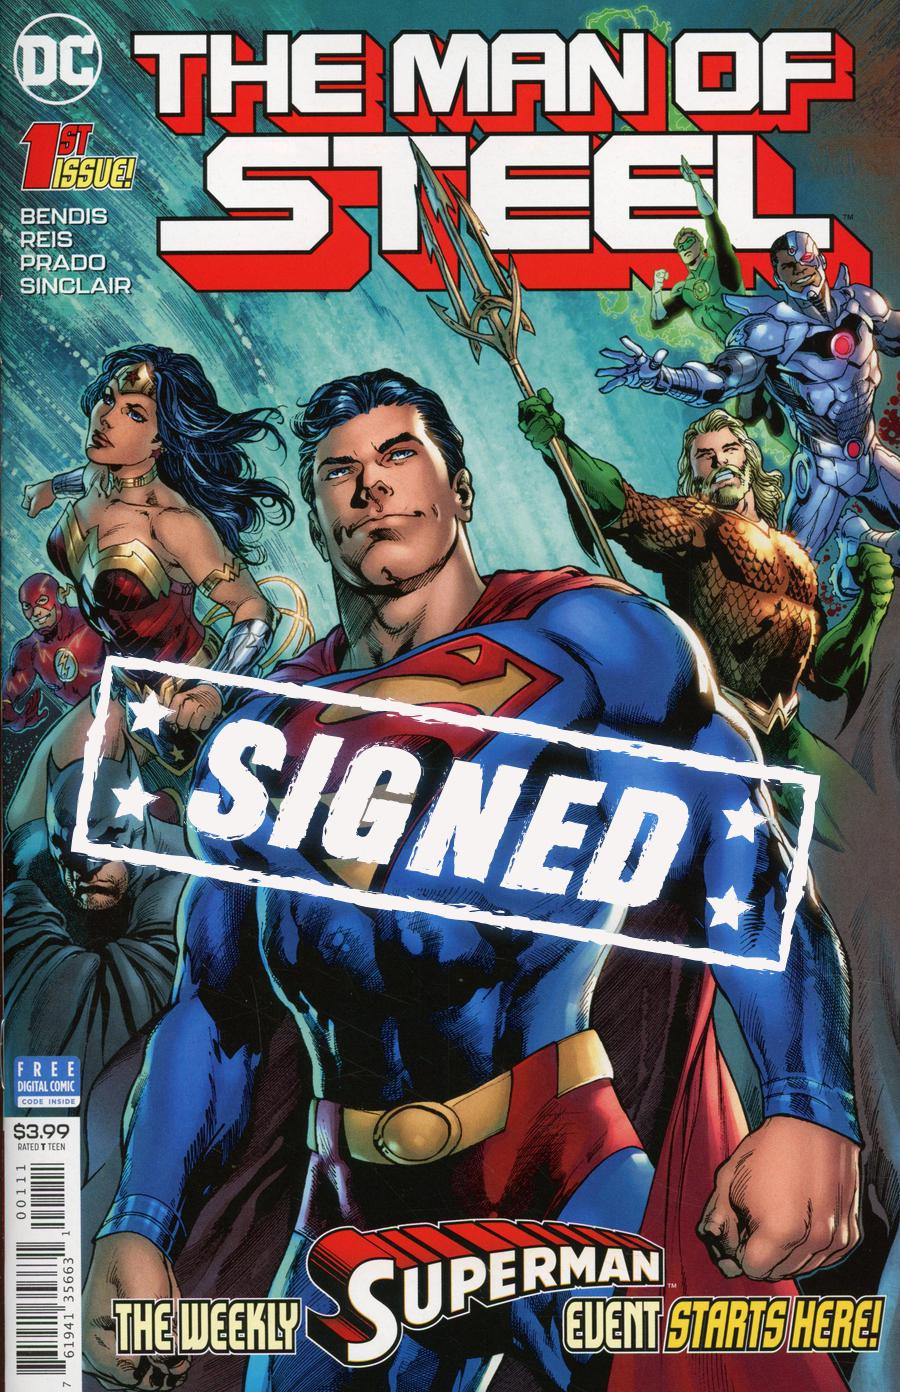 Man Of Steel Vol 2 #1 Cover B DF Signed By Brian Michael Bendis